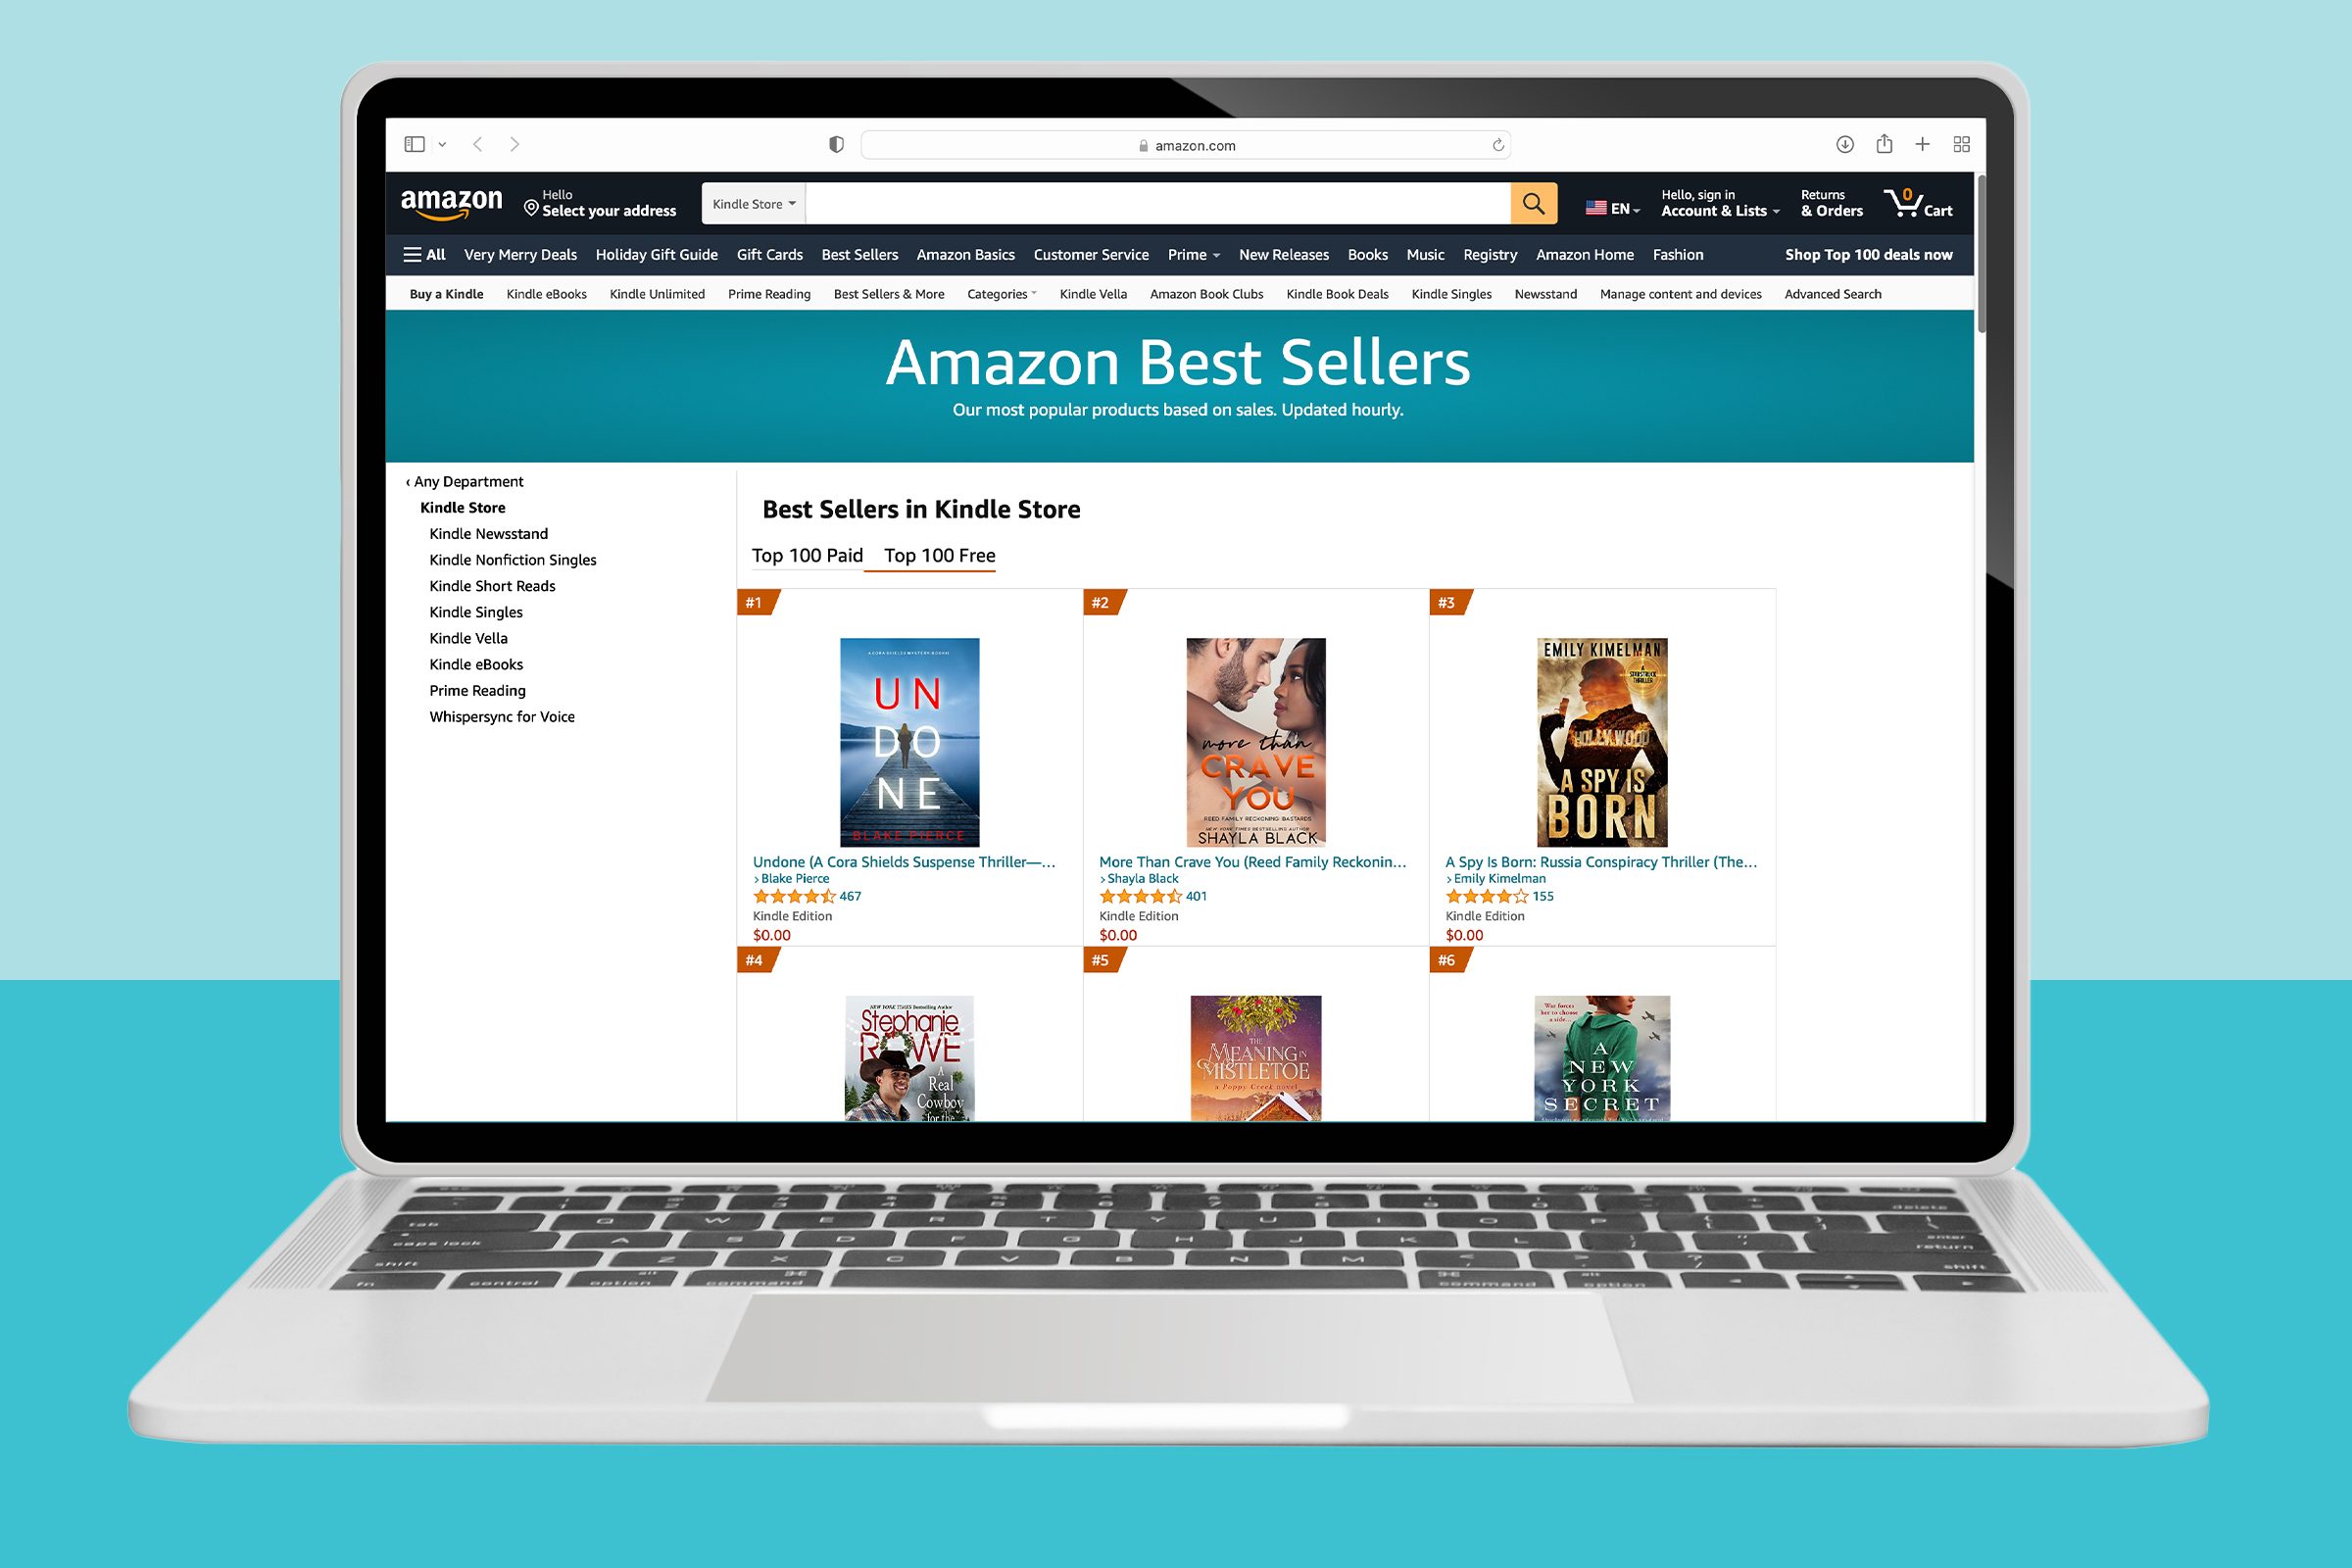 <p>There's a reason why Amazon is a leading bookseller worldwide, and it's not just because it's a great resource for <a href="https://www.rd.com/list/used-books-online/" rel="noopener noreferrer">used books online</a>. With millions of e-books available in the Amazon Kindle store, you can also find an incredible selection of free books for Kindle, including recent releases, the <a href="https://www.rd.com/list/most-anticipated-books-this-year/" rel="noopener noreferrer">most-anticipated books</a> of the year and the best <a href="https://www.rd.com/list/best-fiction-books/" rel="noopener noreferrer">fiction books</a> and <a href="https://www.rd.com/list/best-nonfiction-books/" rel="noopener noreferrer">nonfiction books</a>. You can browse the list of the <a href="https://www.amazon.com/gp/bestsellers/digital-text/ref=zg_bs?ie=UTF8&tf=1" rel="noopener noreferrer">top 100 free Kindle books</a>. Or search the <a href="https://www.amazon.com/kindle-dbs/storefront?storeType=browse&node=154606011" rel="noopener noreferrer">Kindle page</a> for your favorite <a href="https://www.rd.com/article/book-genres/" rel="noopener noreferrer">book genre</a> (the "Categories" tab at the top is the place to start), click "See all results" at the bottom of the page and set the "Sort by" function to "Price: Low to High." From there, you can download books for free with a single click. It's even easier if you have a Kindle device: Simply search for "free," and click "Free Kindle Books" in the results.</p> <p>It's important to note that free Kindle-edition books are different from books you can get for free with a Kindle Unlimited membership. At $9.99 per month, membership isn't free. That said, if you're an avid reader and willing to spend <em>some </em>money, you can sign up for unlimited access to 3 million books, including popular series and bestsellers like J.K. Rowling's <a href="https://www.amazon.com/gp/product/B0192CTMYG" rel="noopener"><em>Harry Potter</em></a> and Colleen Hoover's <a href="https://www.amazon.com/Reminders-Him-Novel-Colleen-Hoover-ebook/dp/B0976V6YSL/" rel="noopener"><em>Reminders of Him</em></a>.</p> <p><strong>Pros:</strong></p> <ul> <li>Millions of e-books</li> <li>Can easily filter by genre and reader reviews</li> <li>Constantly updated with new free Kindle books</li> <li>No return deadlines</li> </ul> <p><strong>Cons:</strong></p> <ul> <li>Requires an Amazon account</li> <li>Must download the (free) Kindle app if you don't already have a Kindle device</li> <li>Distinguishing between free Kindle-edition books and Kindle Unlimited books may be confusing</li> </ul> <p class="listicle-page__cta-button-shop"><a class="shop-btn" href="https://www.amazon.com/gp/bestsellers/digital-text/ref=zg_bs?ie=UTF8&tf=1">Read Now</a></p>